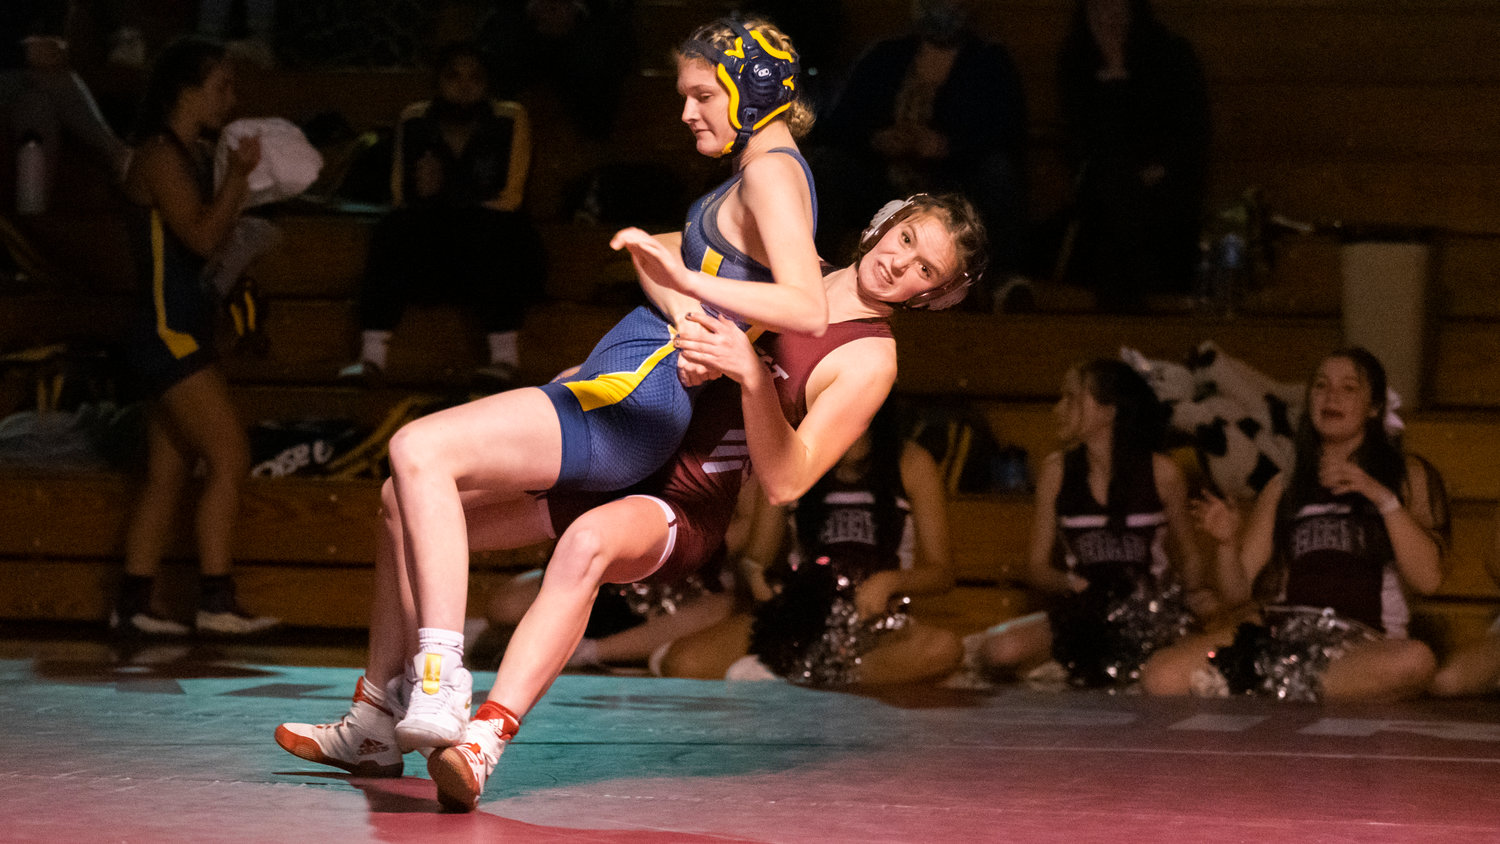 W.F. West Senior Elizabeth Patana brings down her opponent during a wrestling match Thursday night in Chehalis.